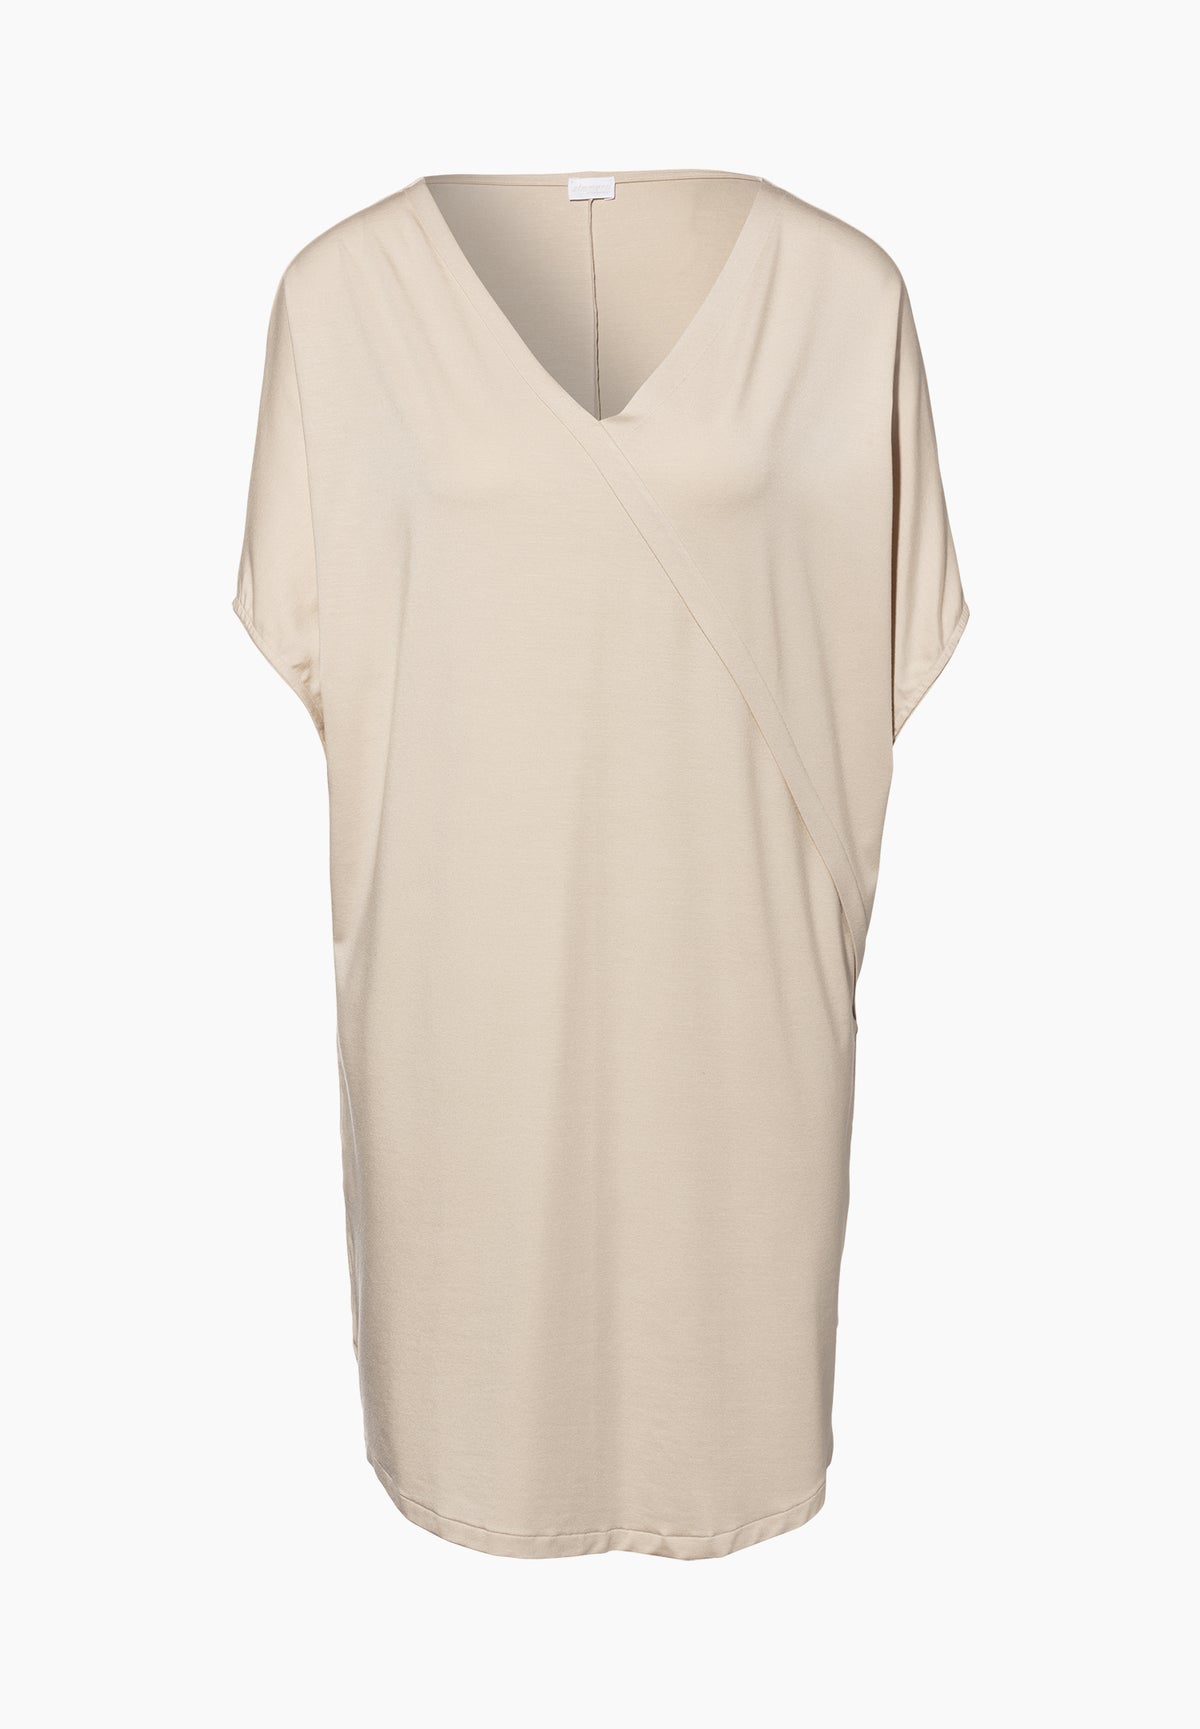 Pureness | Robe courte manches courtes - oatmeal